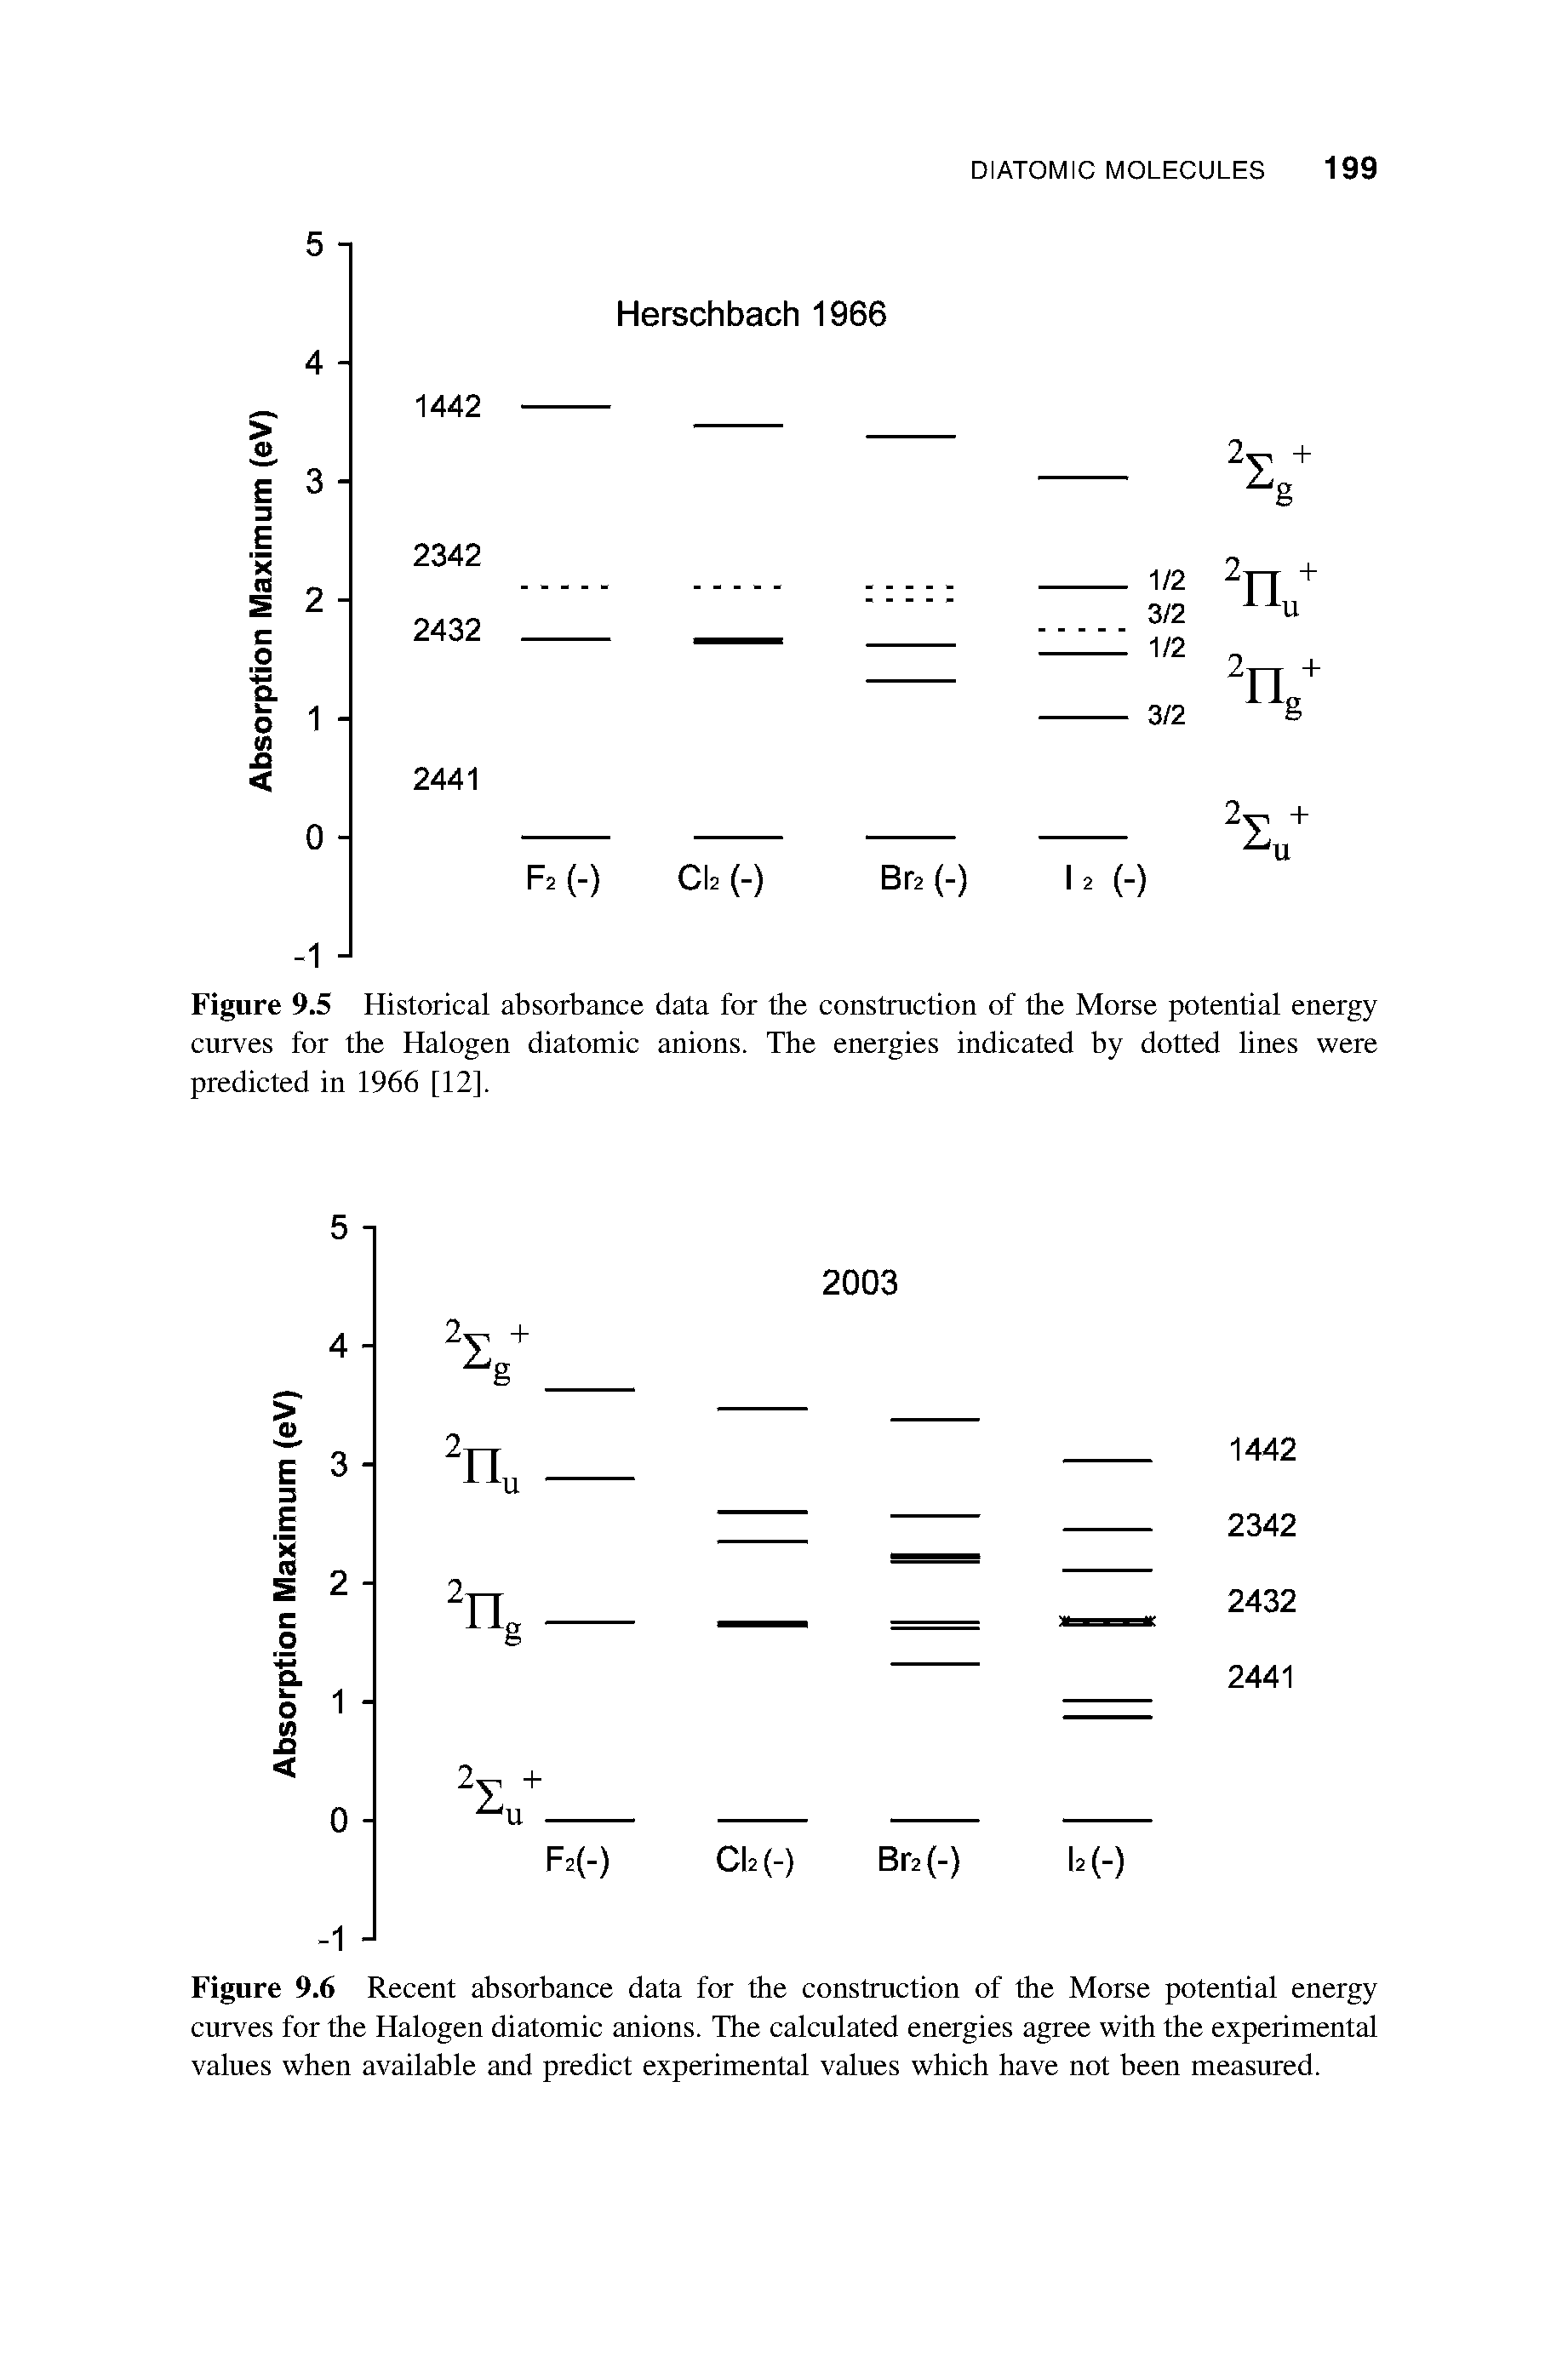 Figure 9.5 Historical absorbance data for the construction of the Morse potential energy curves for the Halogen diatomic anions. The energies indicated by dotted lines were predicted in 1966 [12].